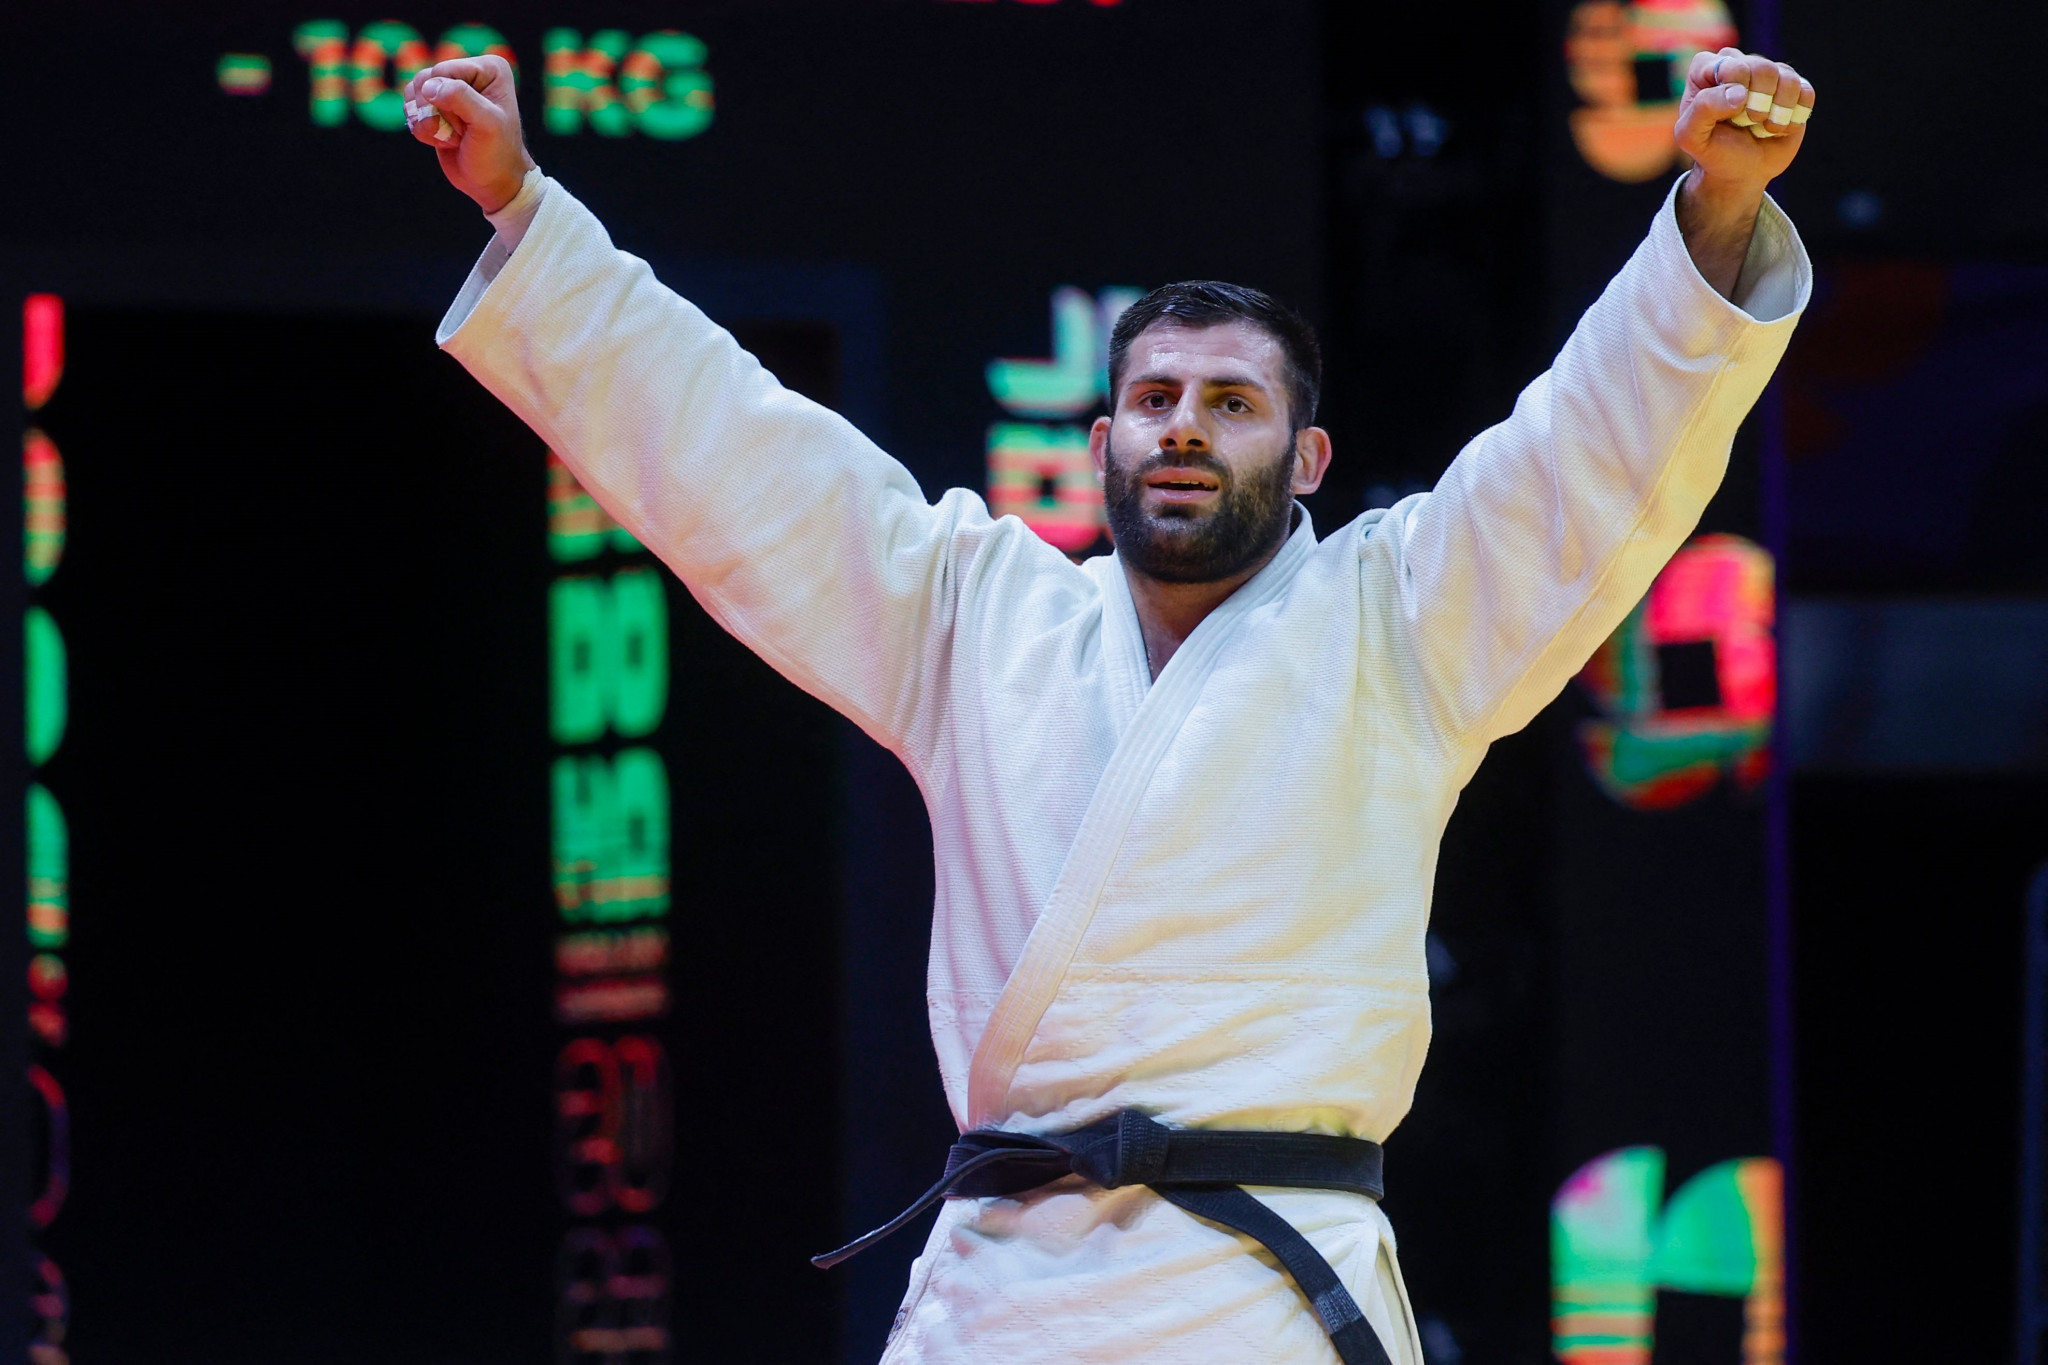 Arman Adamian, who is one of 17 Russian judoka competing as individual neutral athletes in Doha, captured the men's under-100kg title today ©Getty Images